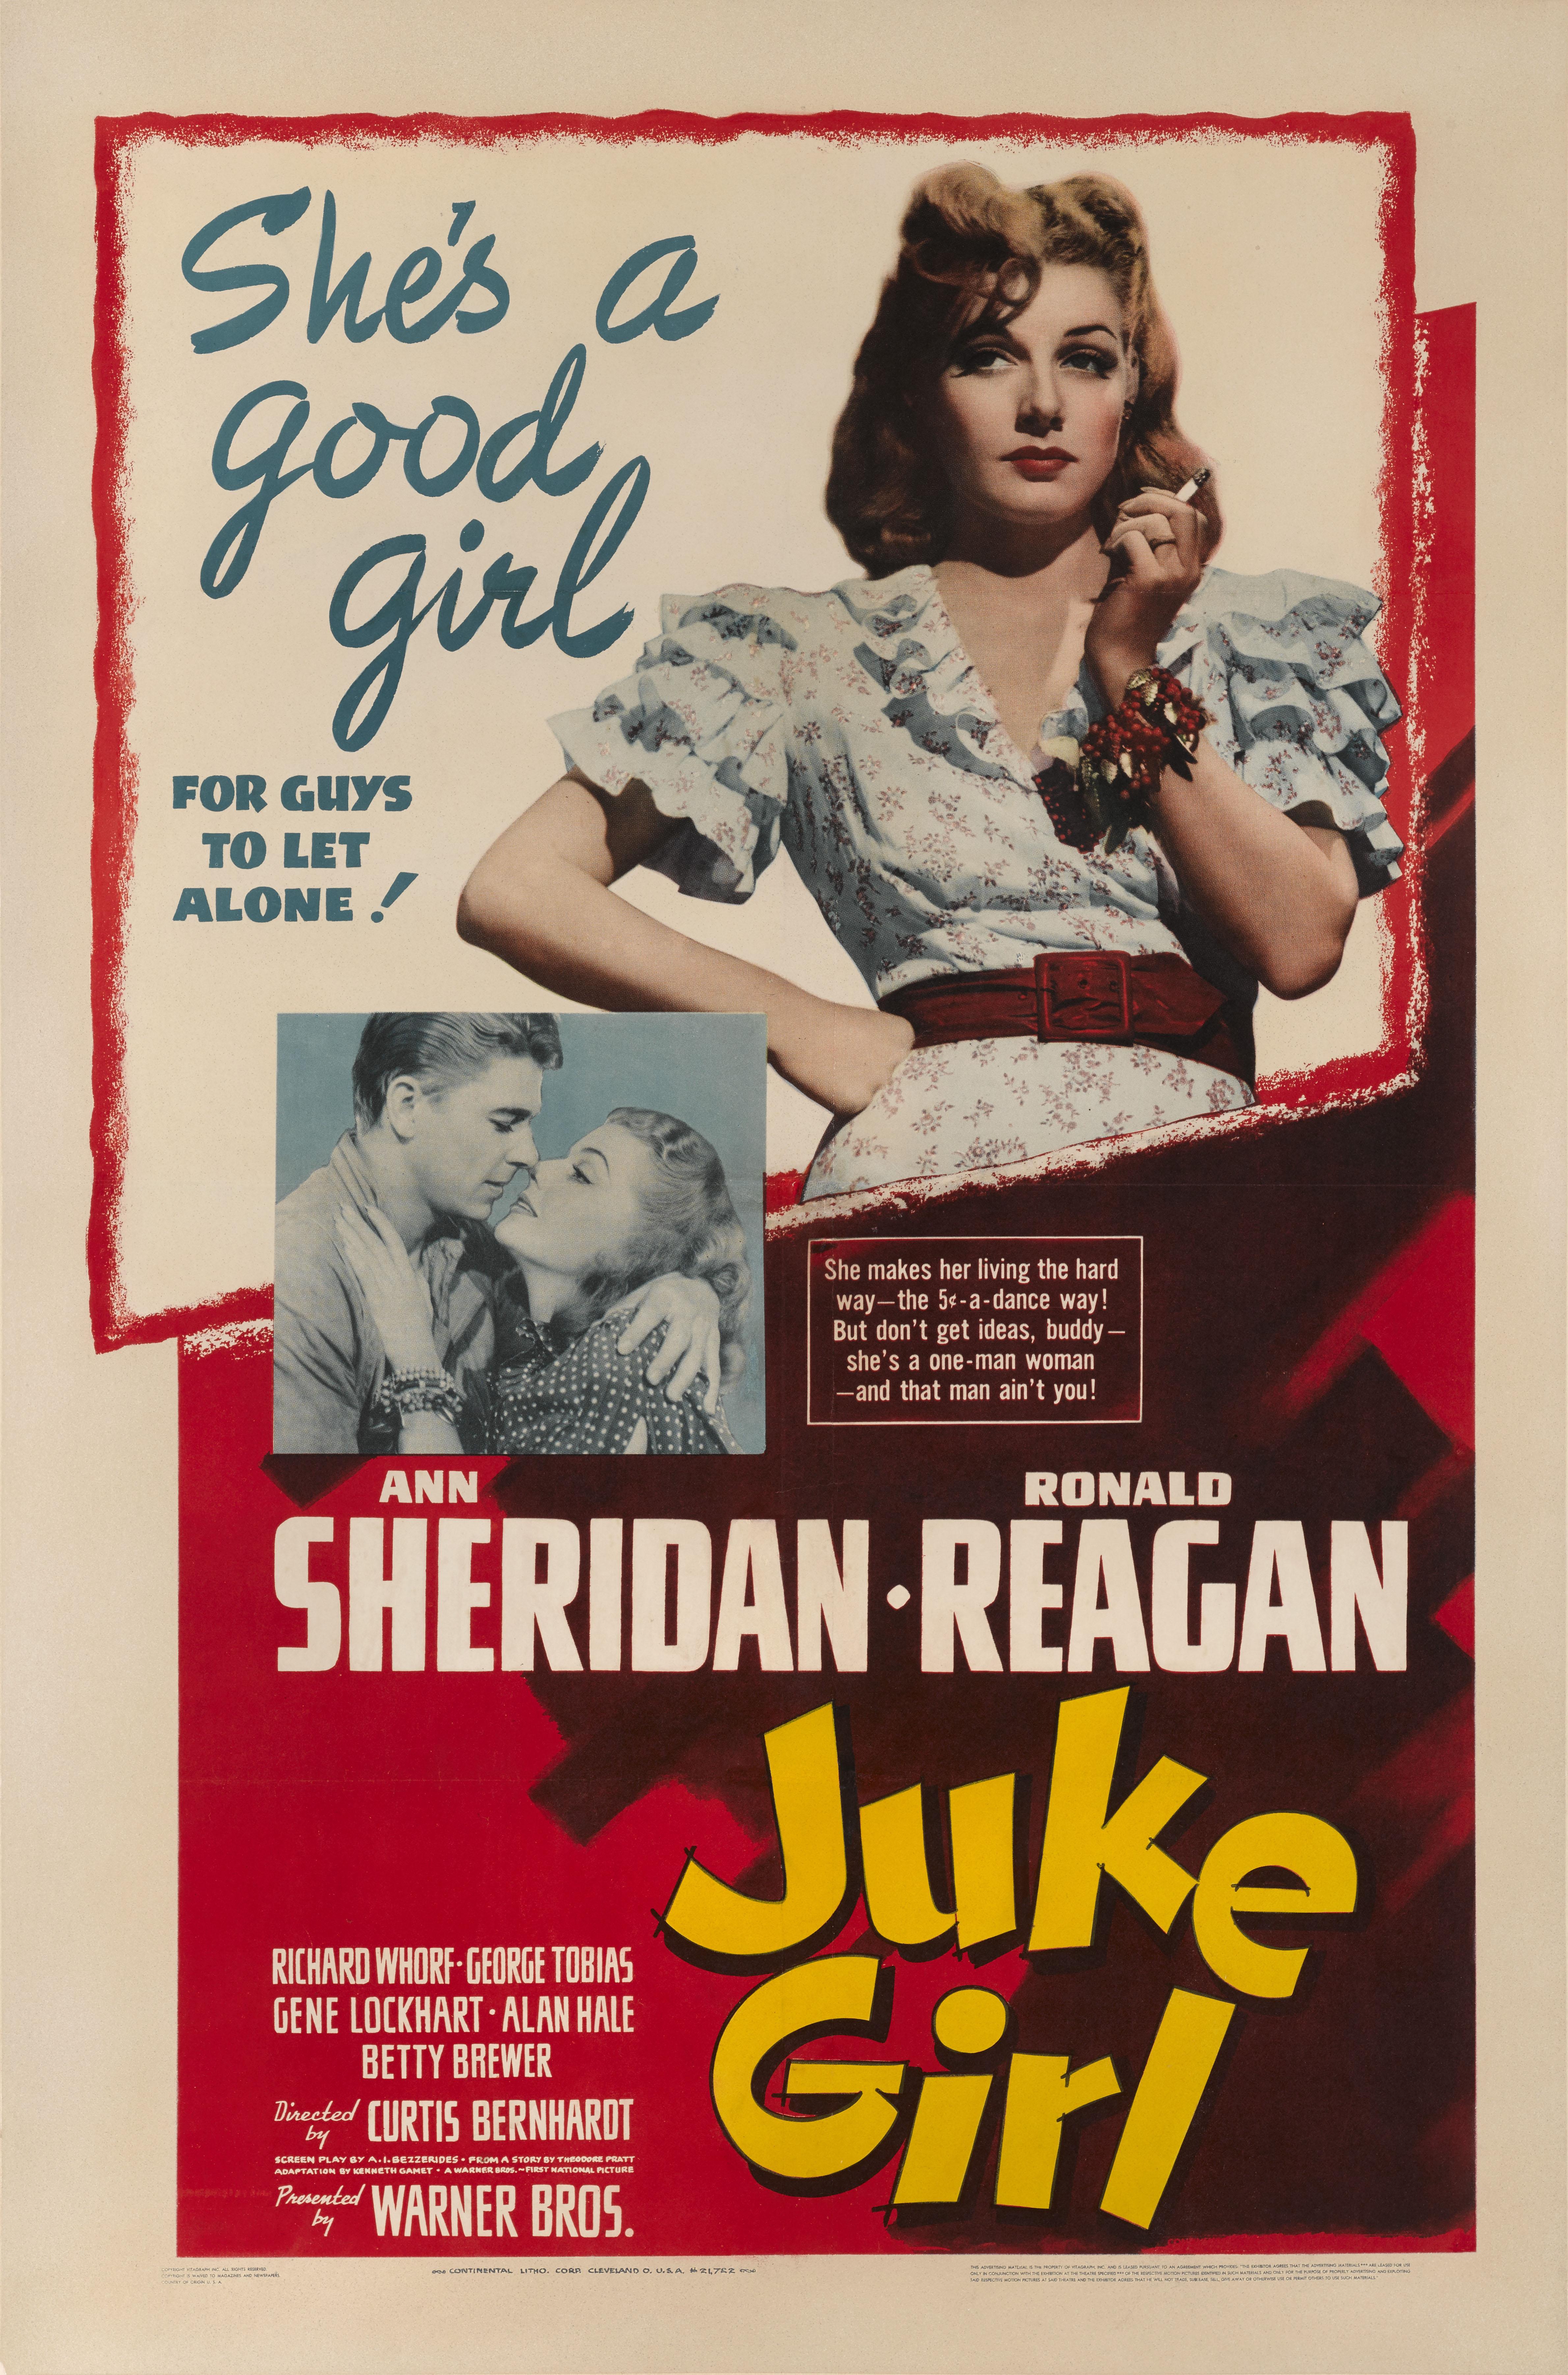 Original US film poster for the 1942 crime mystery film directed by Curtis Bernhardt and staring Ann Sheridan, Ronald Reagan.
This poster is conservation linen backed and it would be shipped rolled in a strong tube.